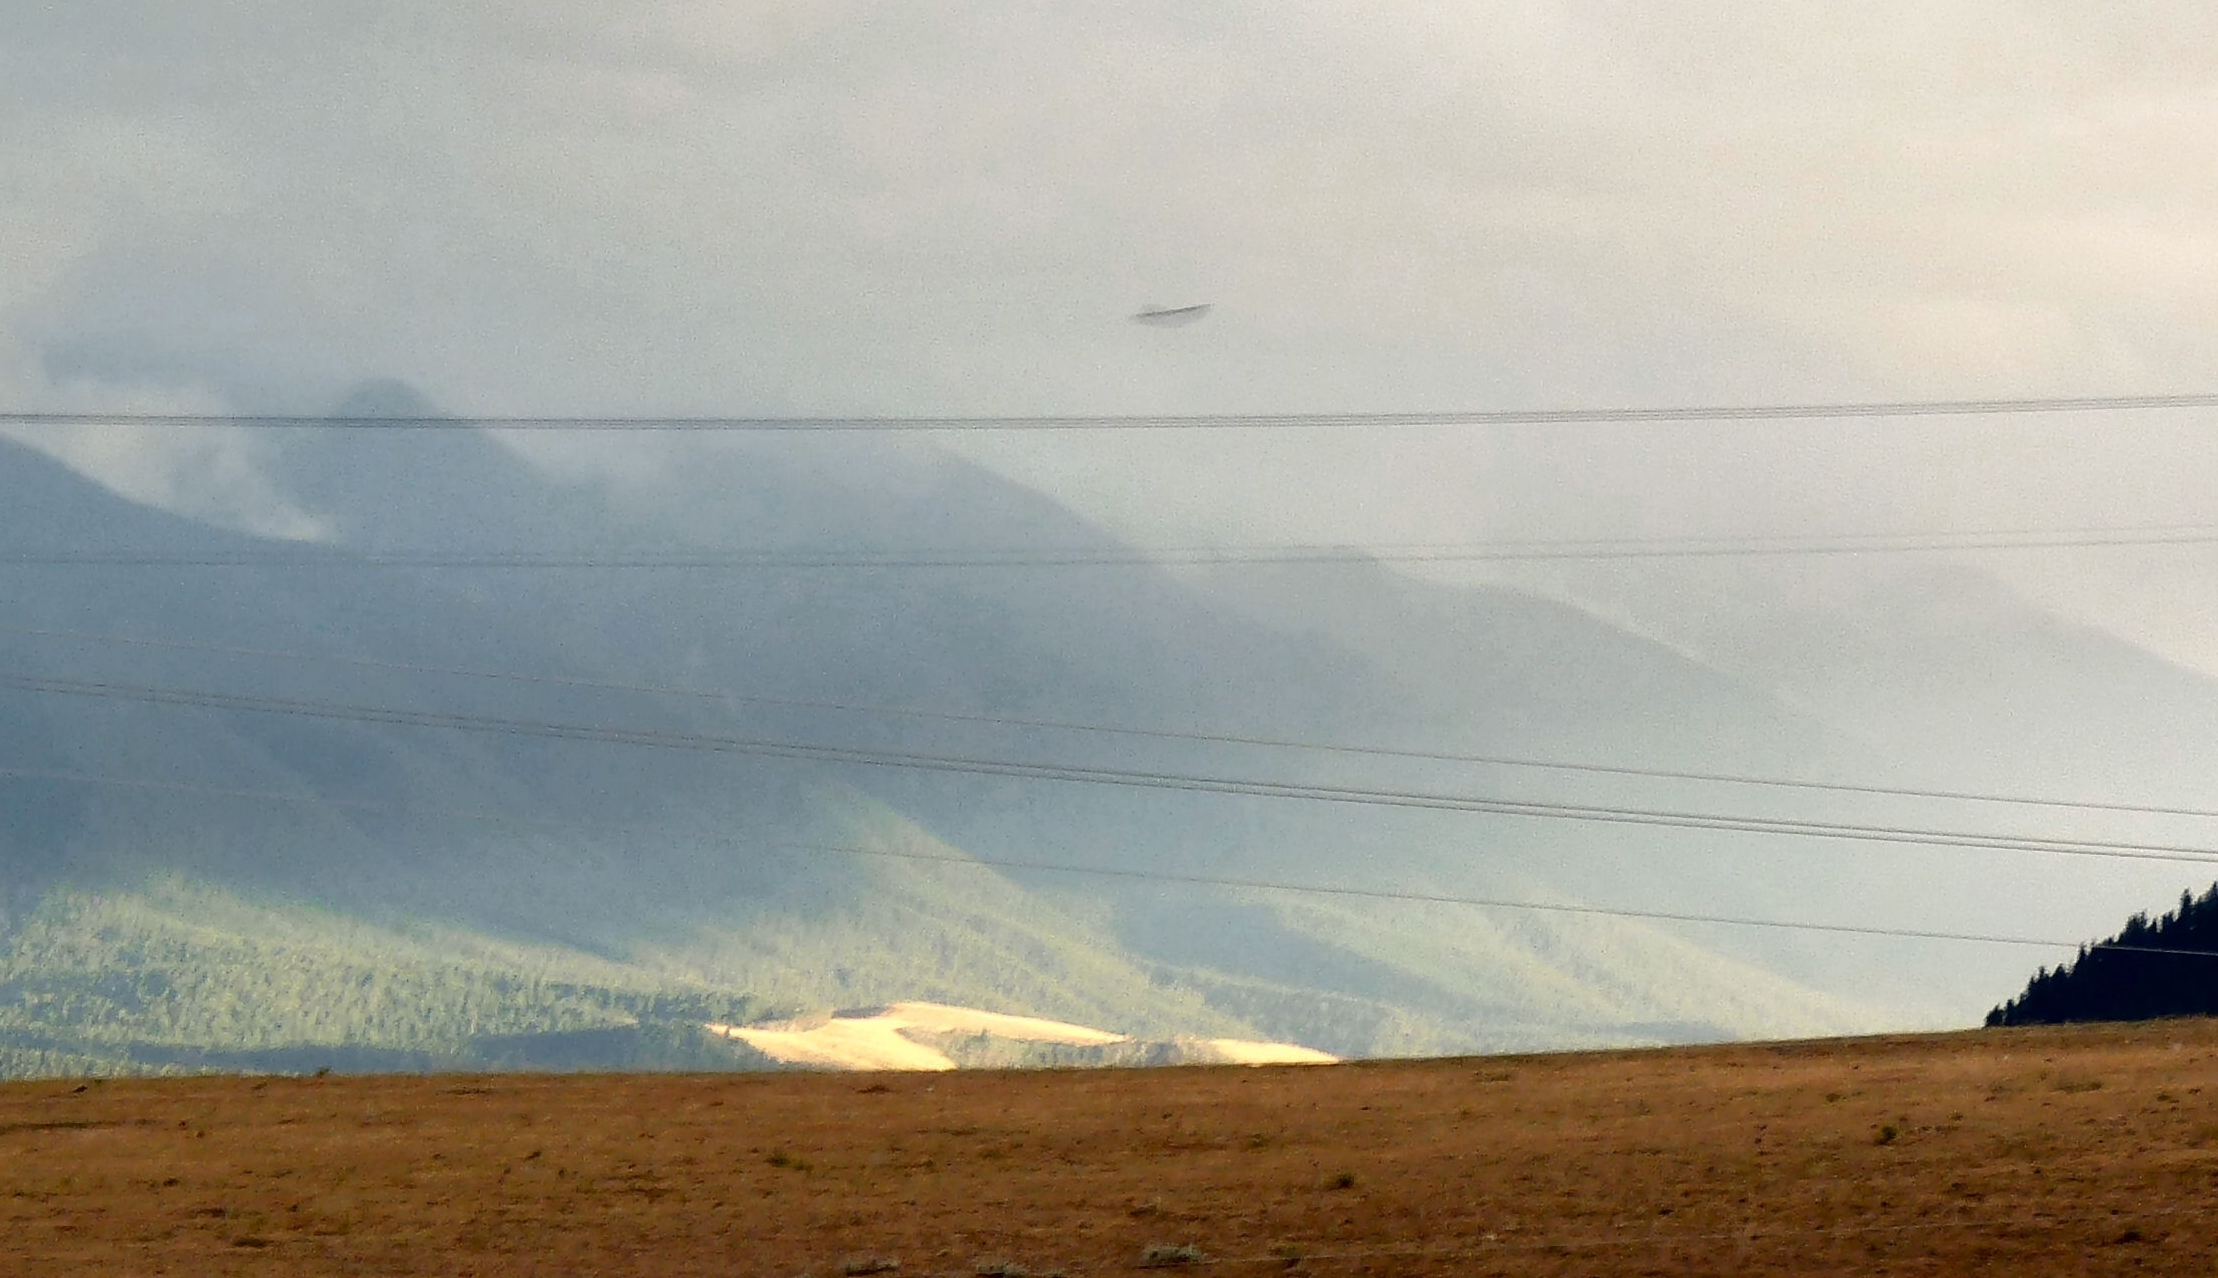 Latest UFO pictures